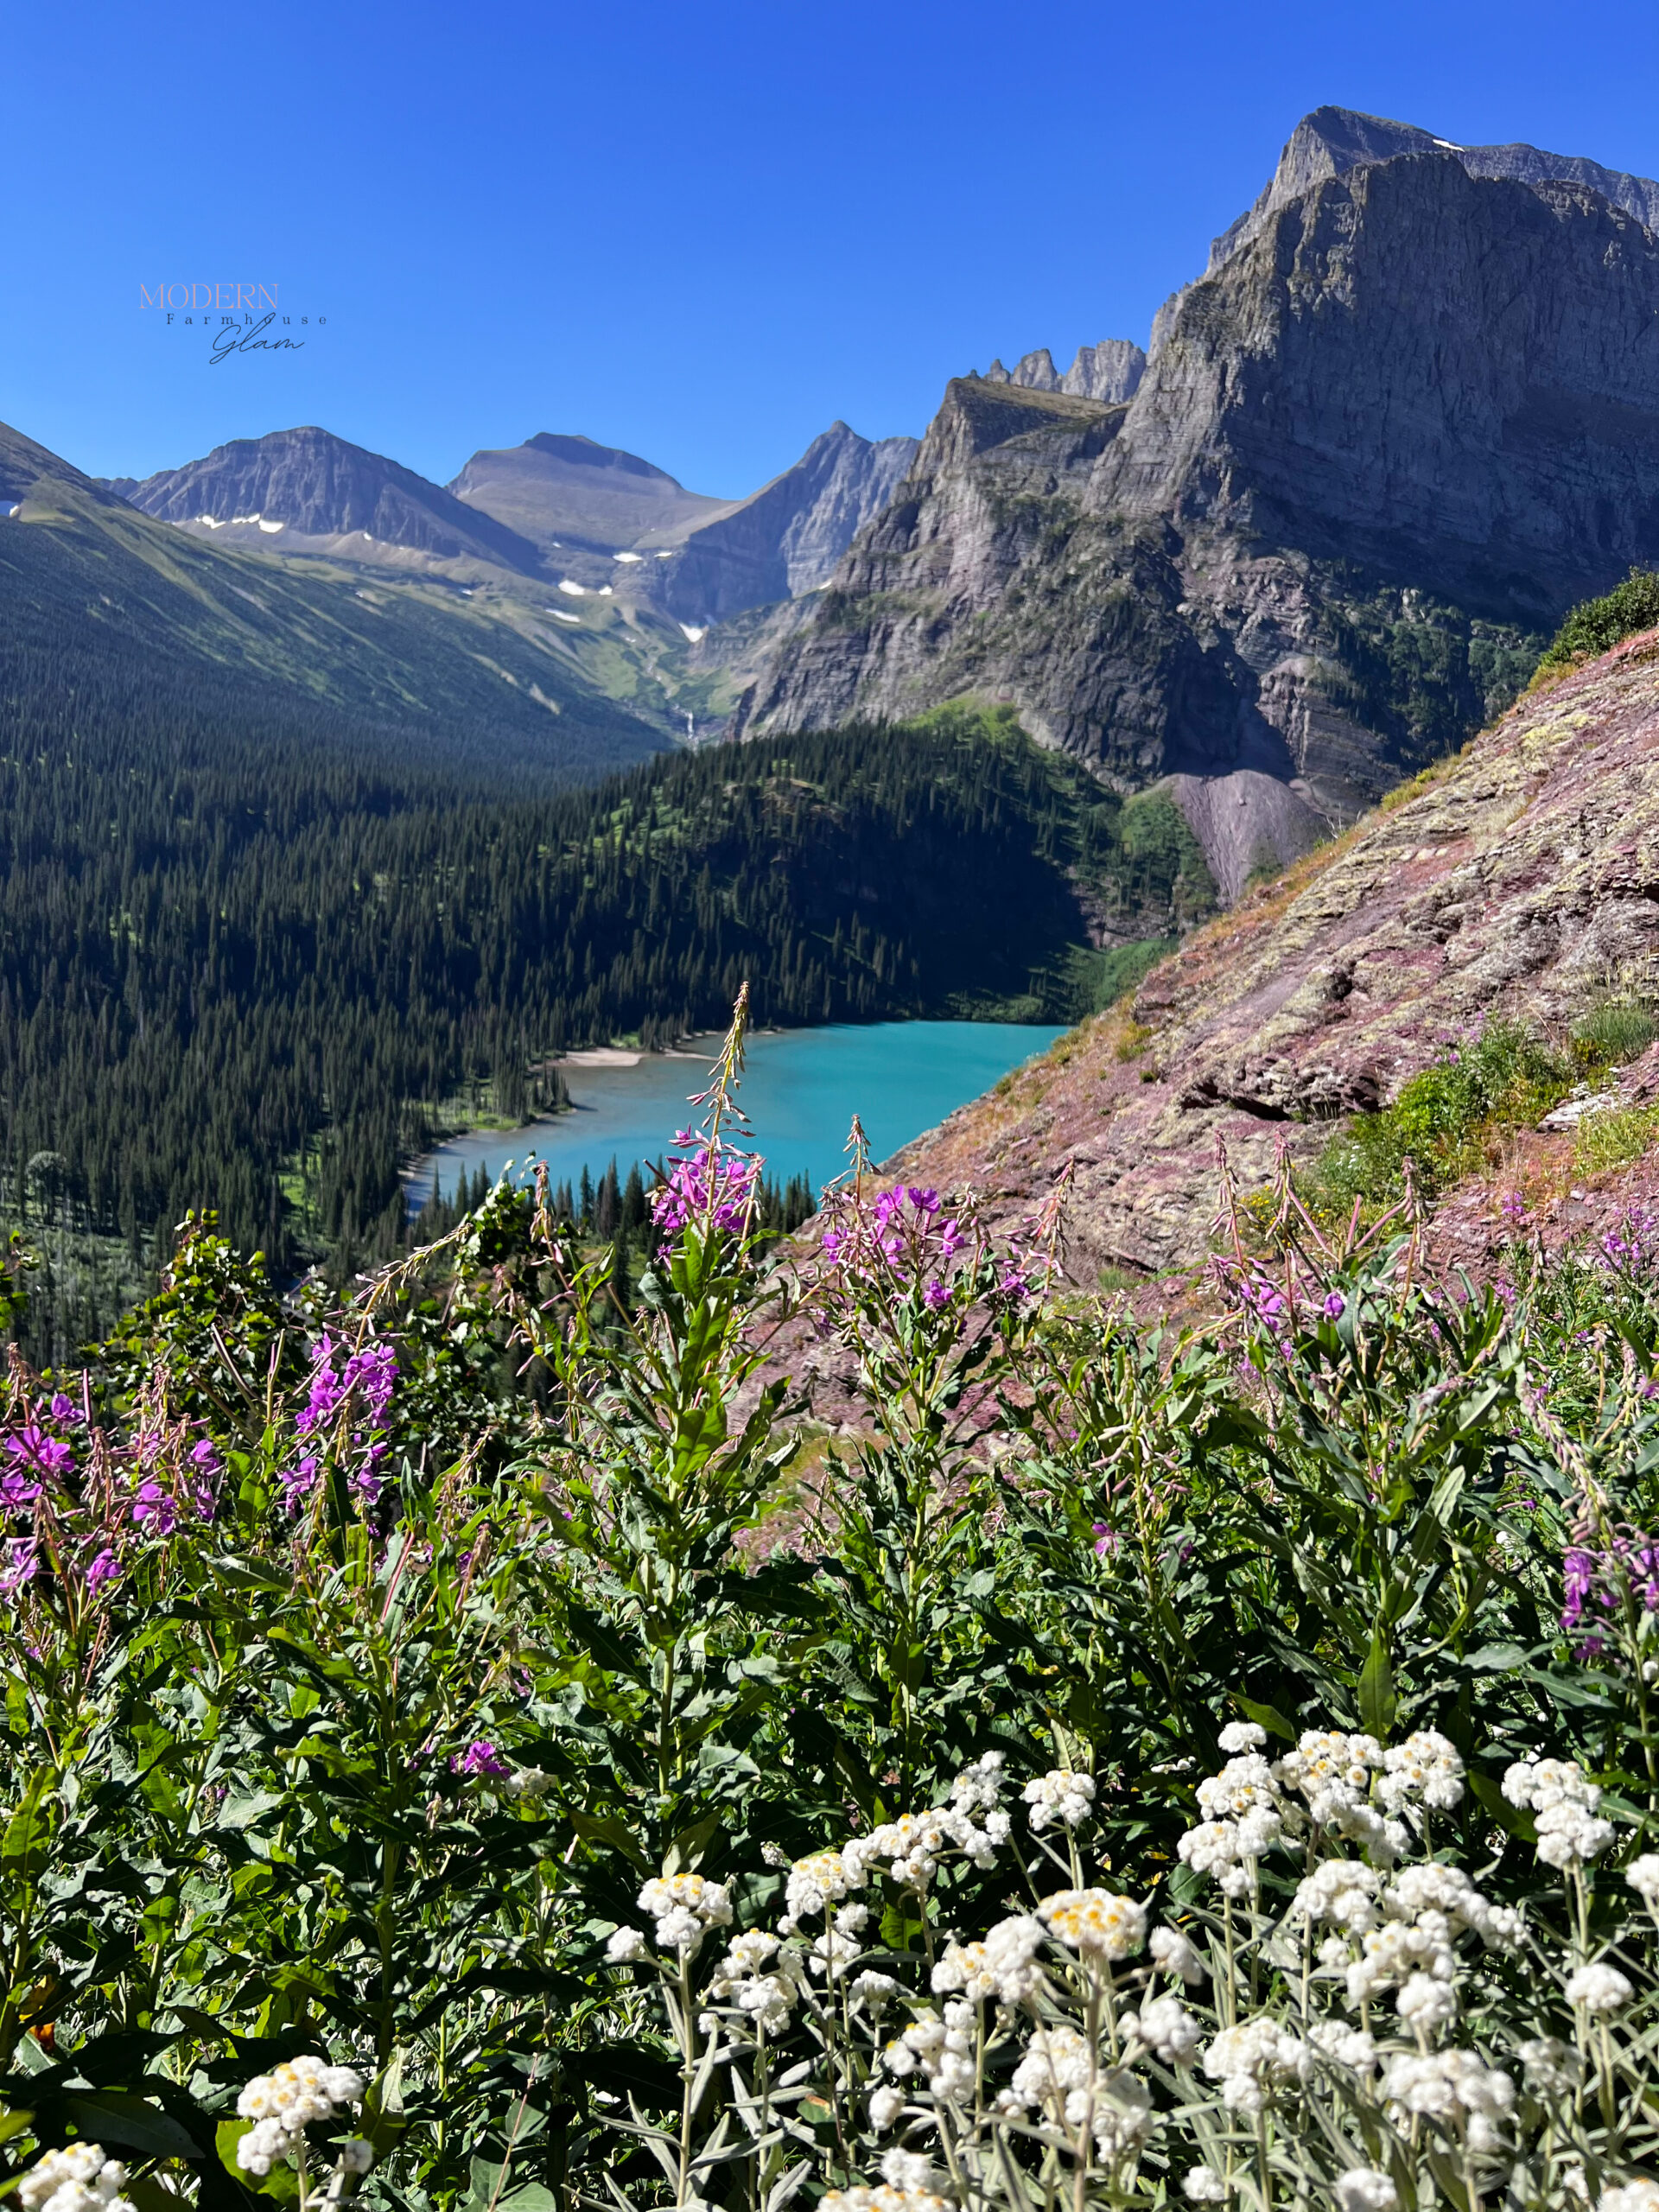 Wildflowers on the trail overlooking Grinell Lake